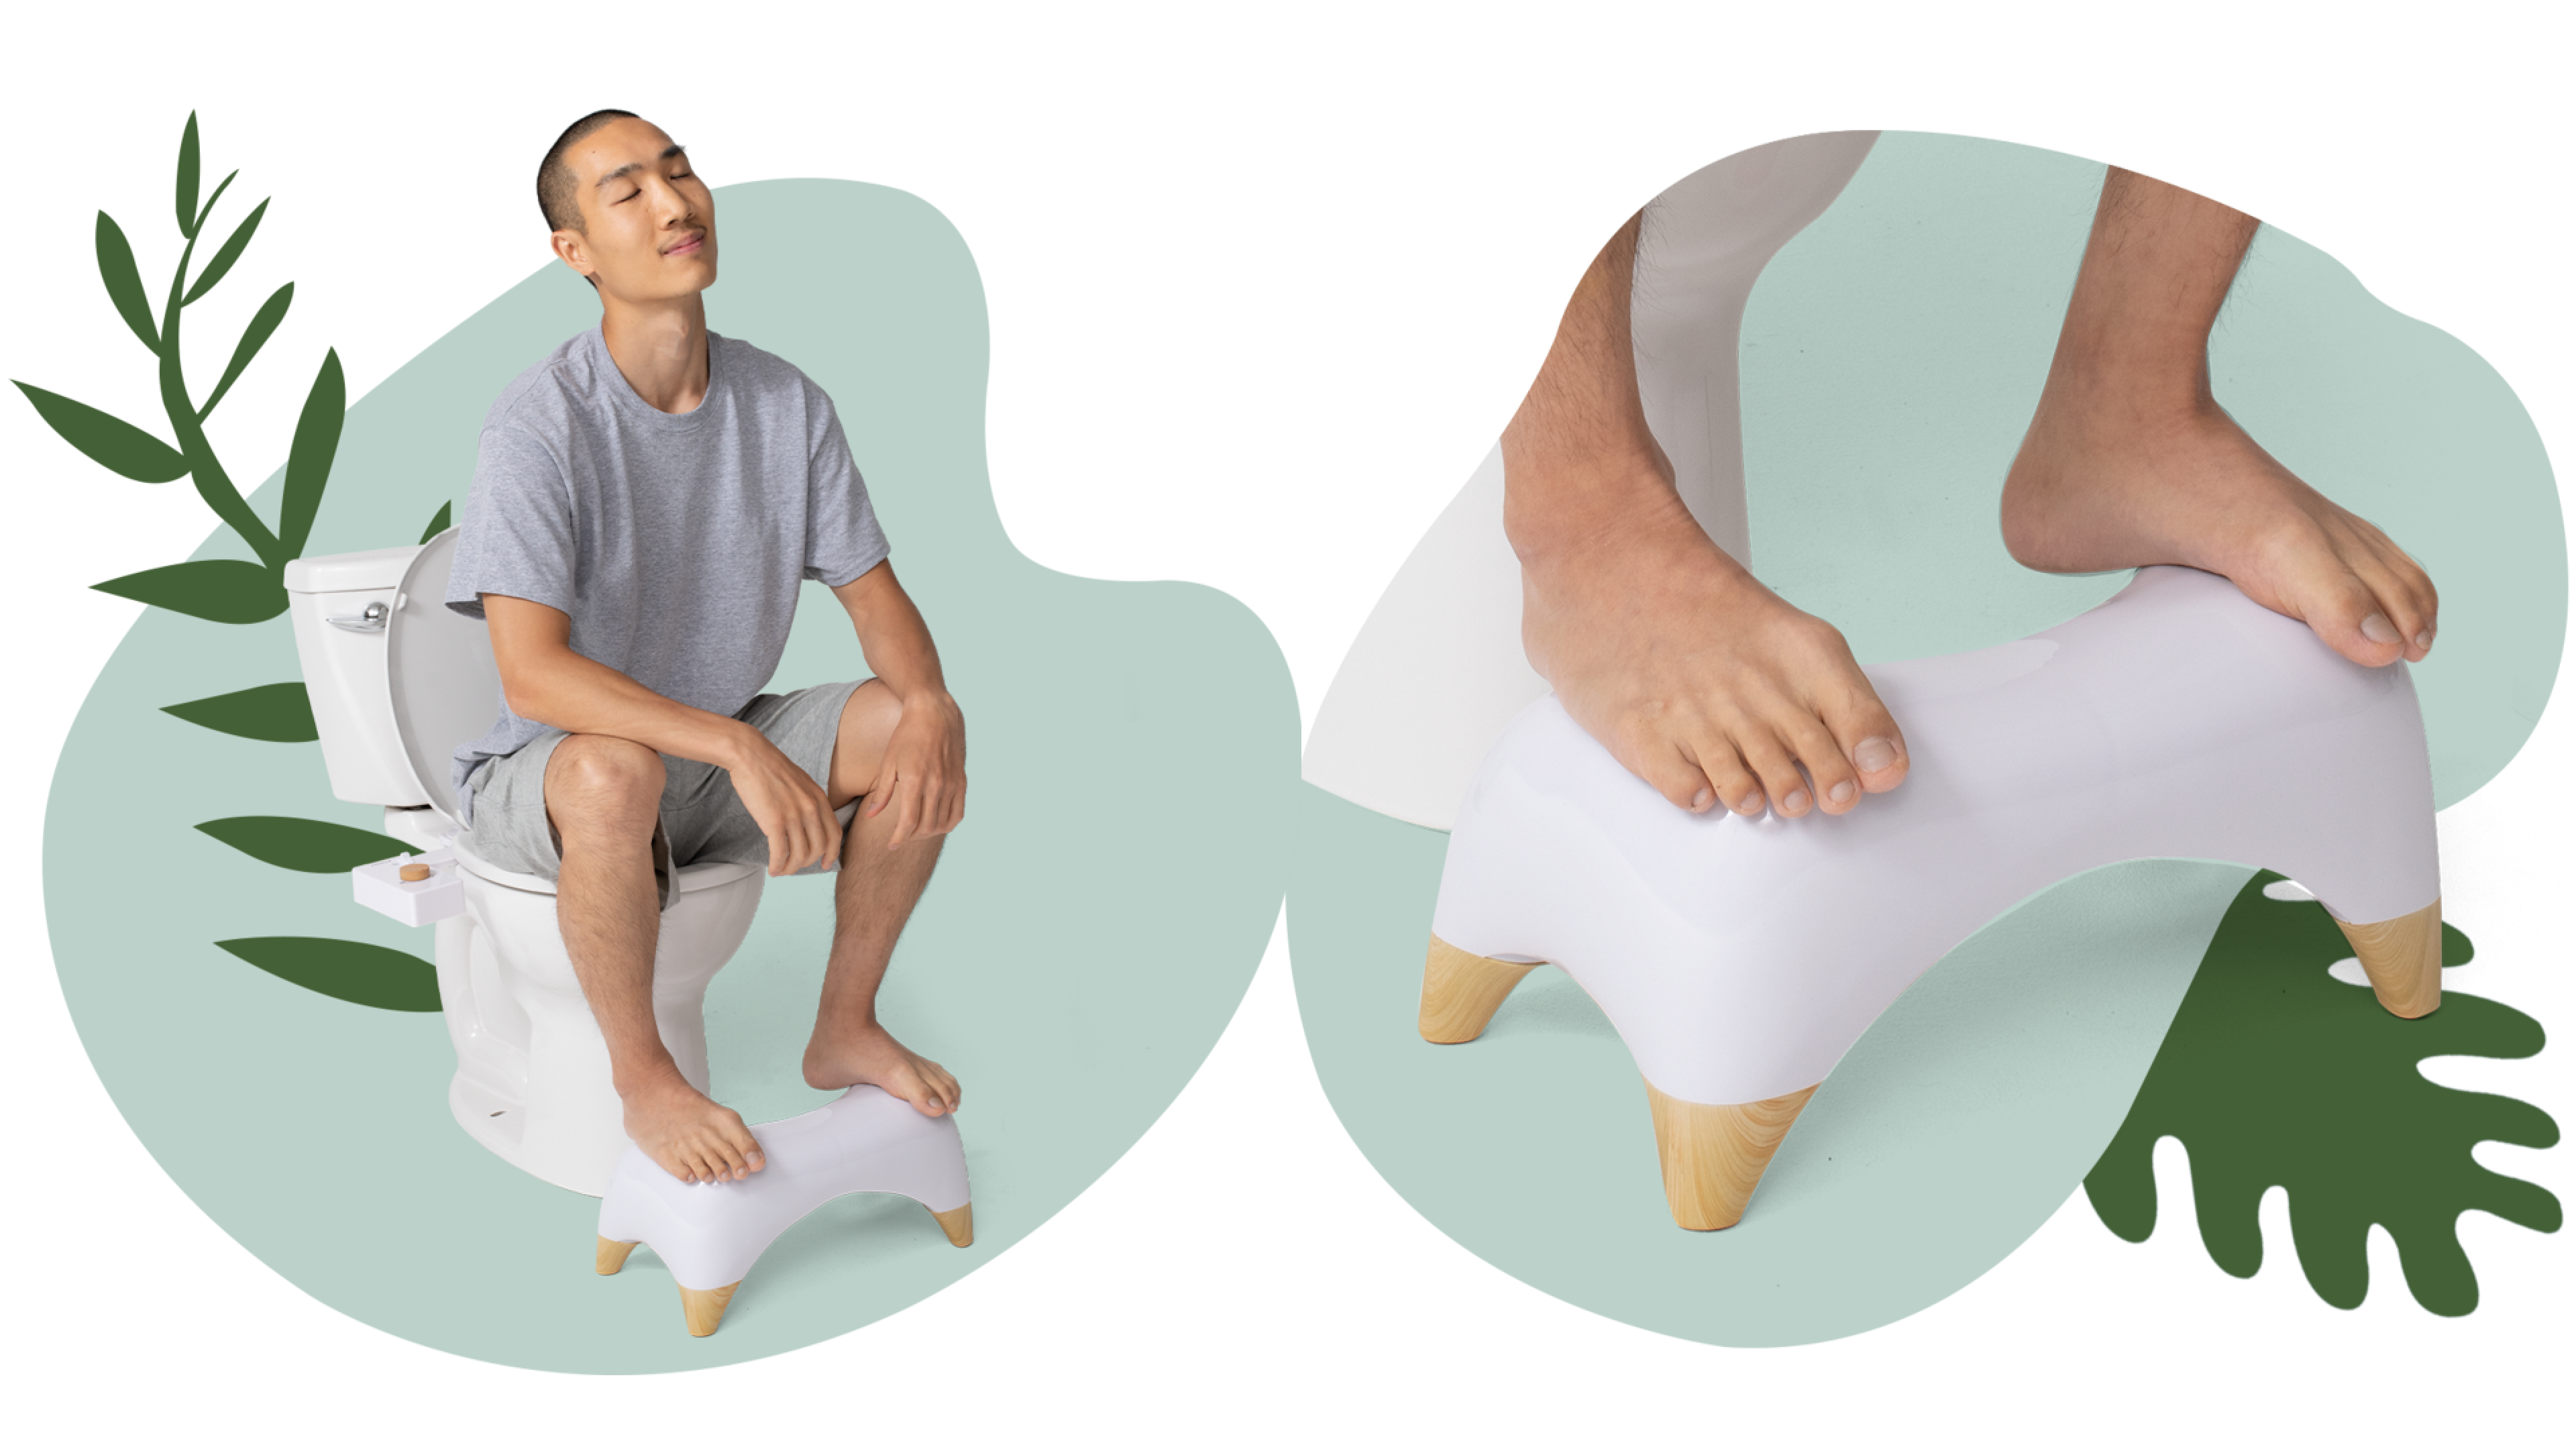 little stool to place in front of your toilet to help with sitting position